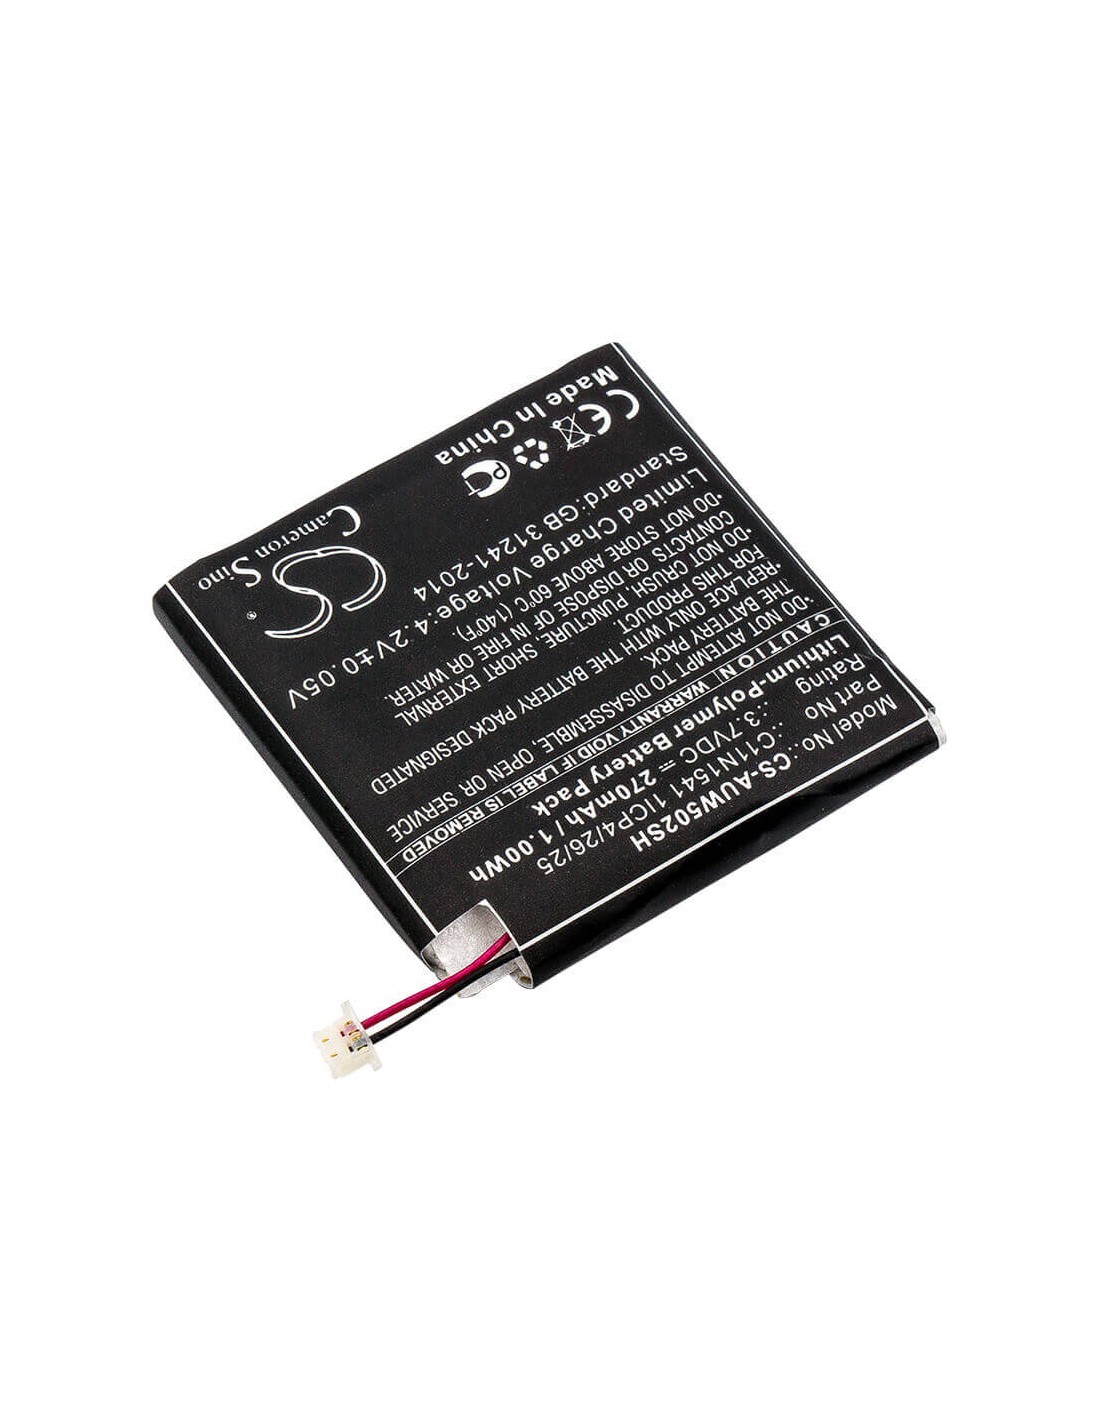 Battery for Asus, W1502qf, Zenwatch 2, 3.7V, 270mAh - 1.00Wh